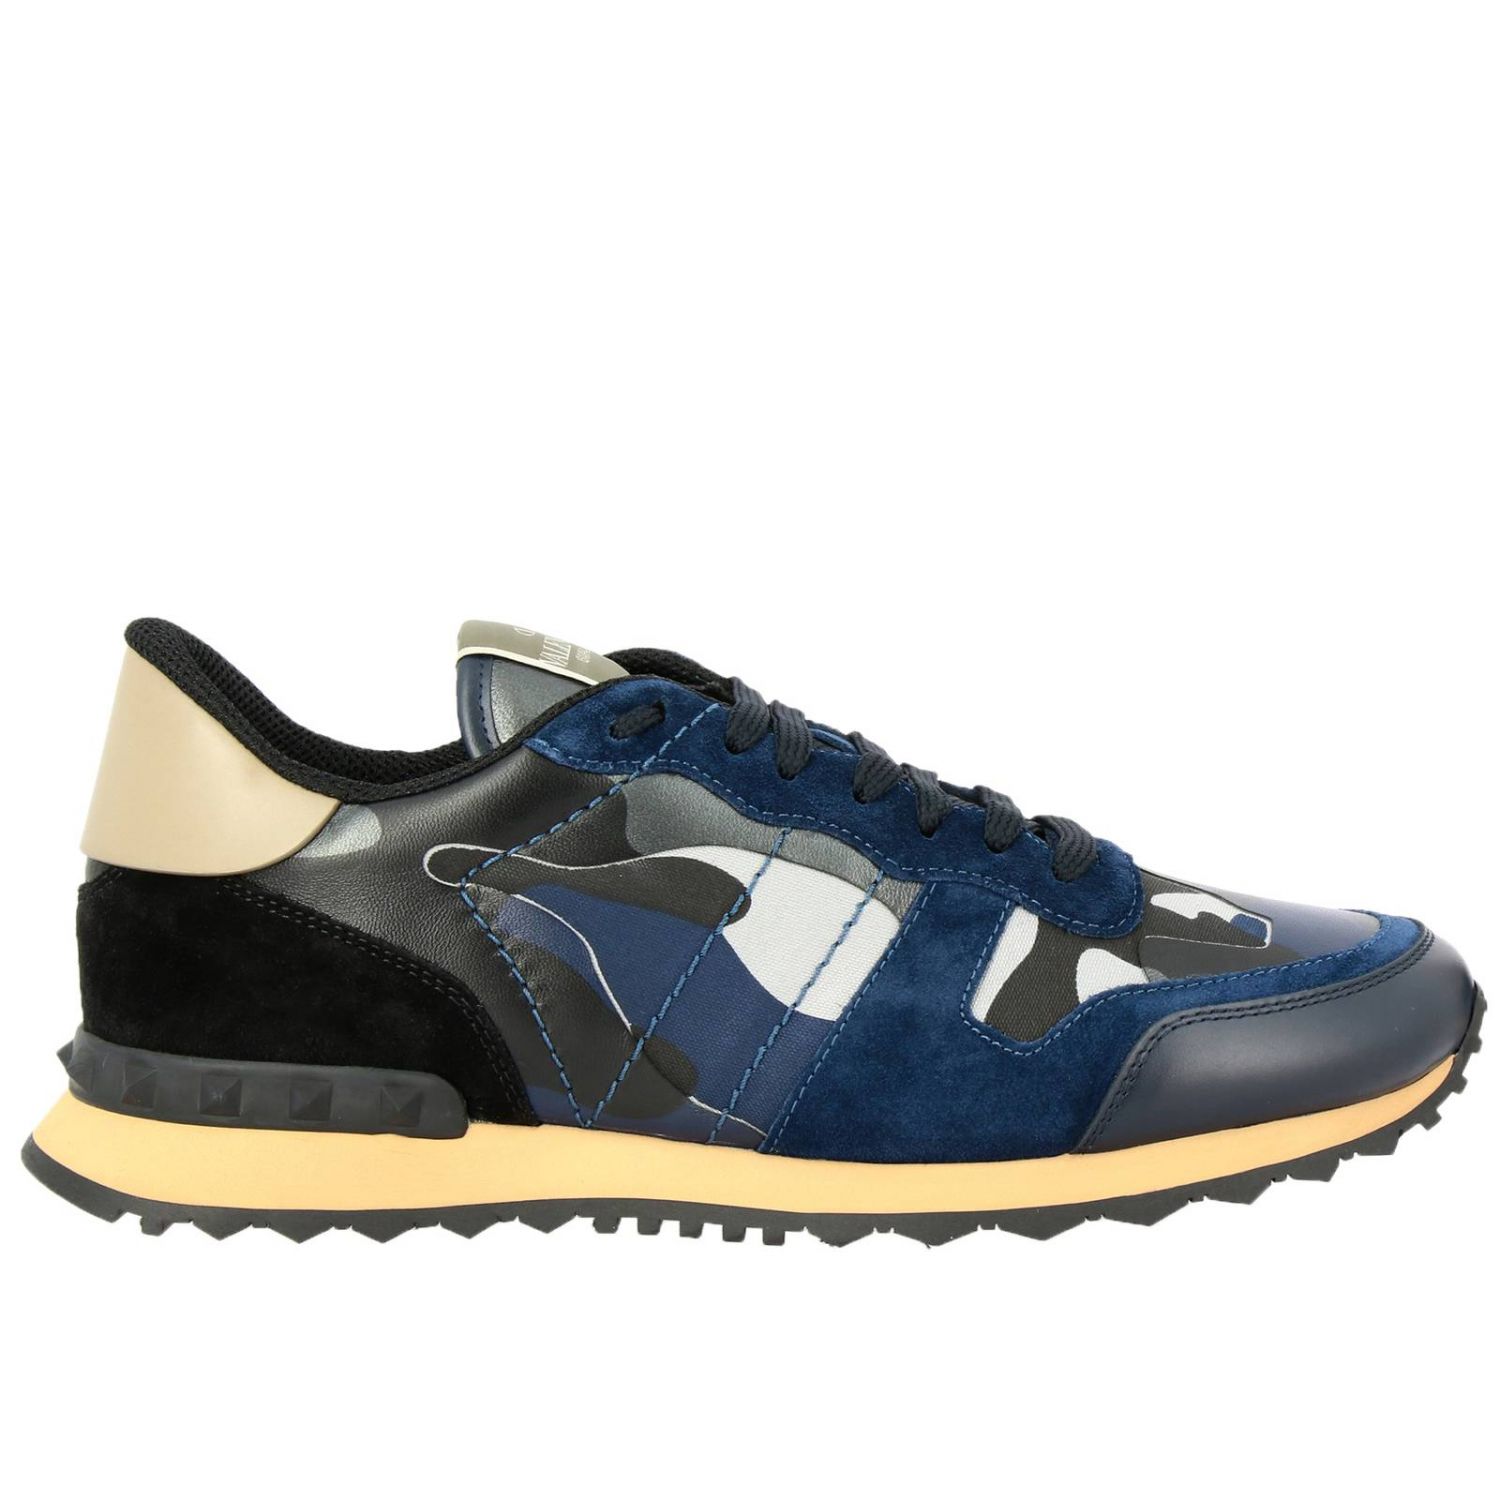 Valentino Rock Runner Blue Camouflage In Suede And Leather - Rogue